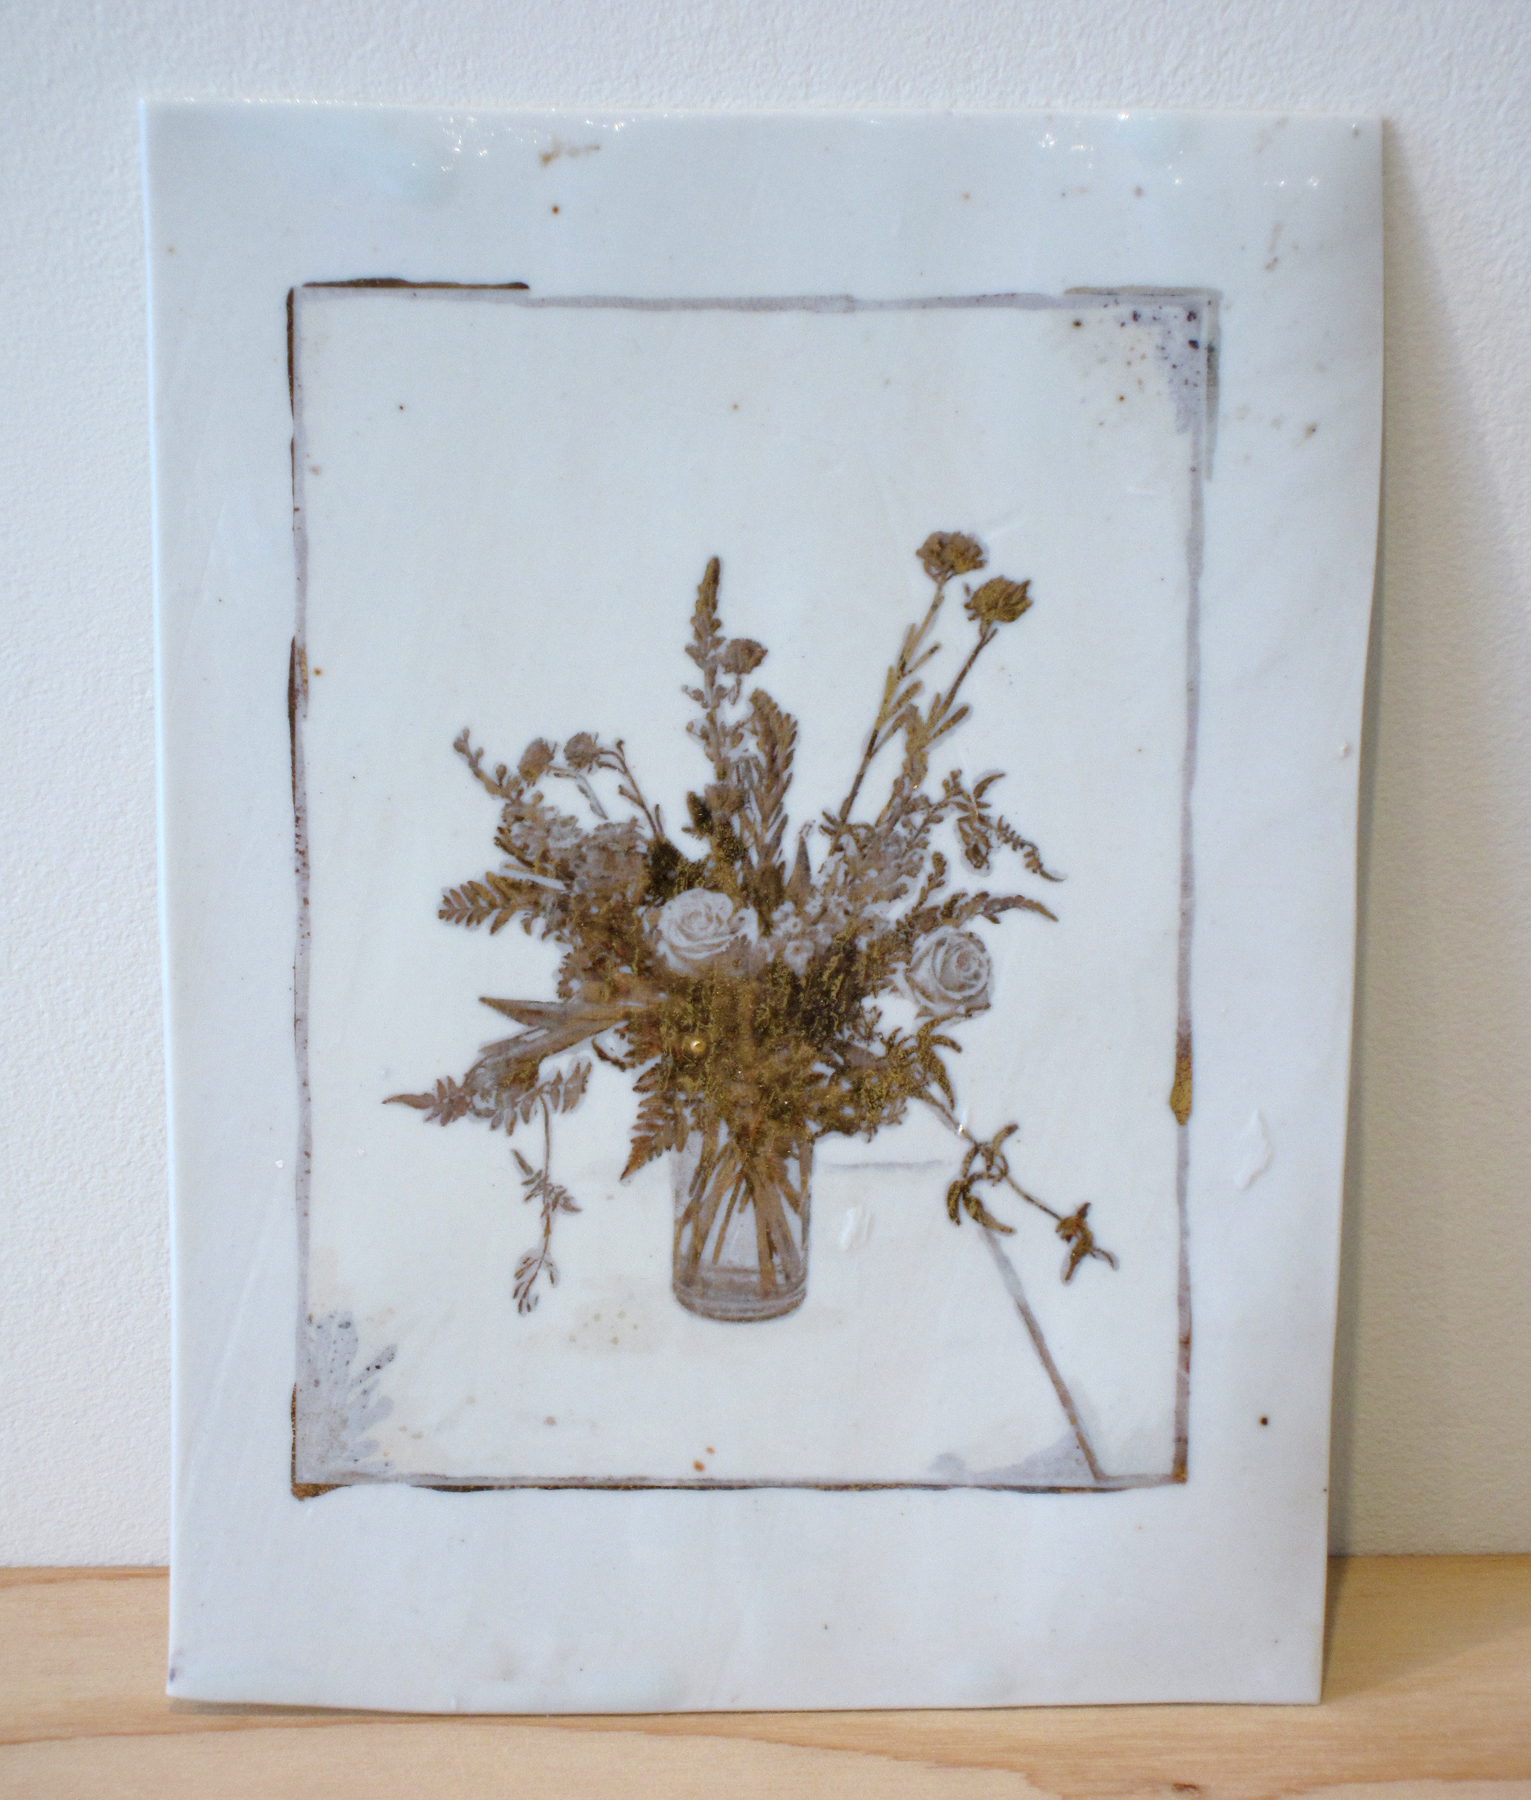   ERIK SCOLLON   Flowers from The Oakland (Stay the Way You Are),&nbsp; 2013, gold luster on porcelain, 8 1/4" x 6" x 1/16" 